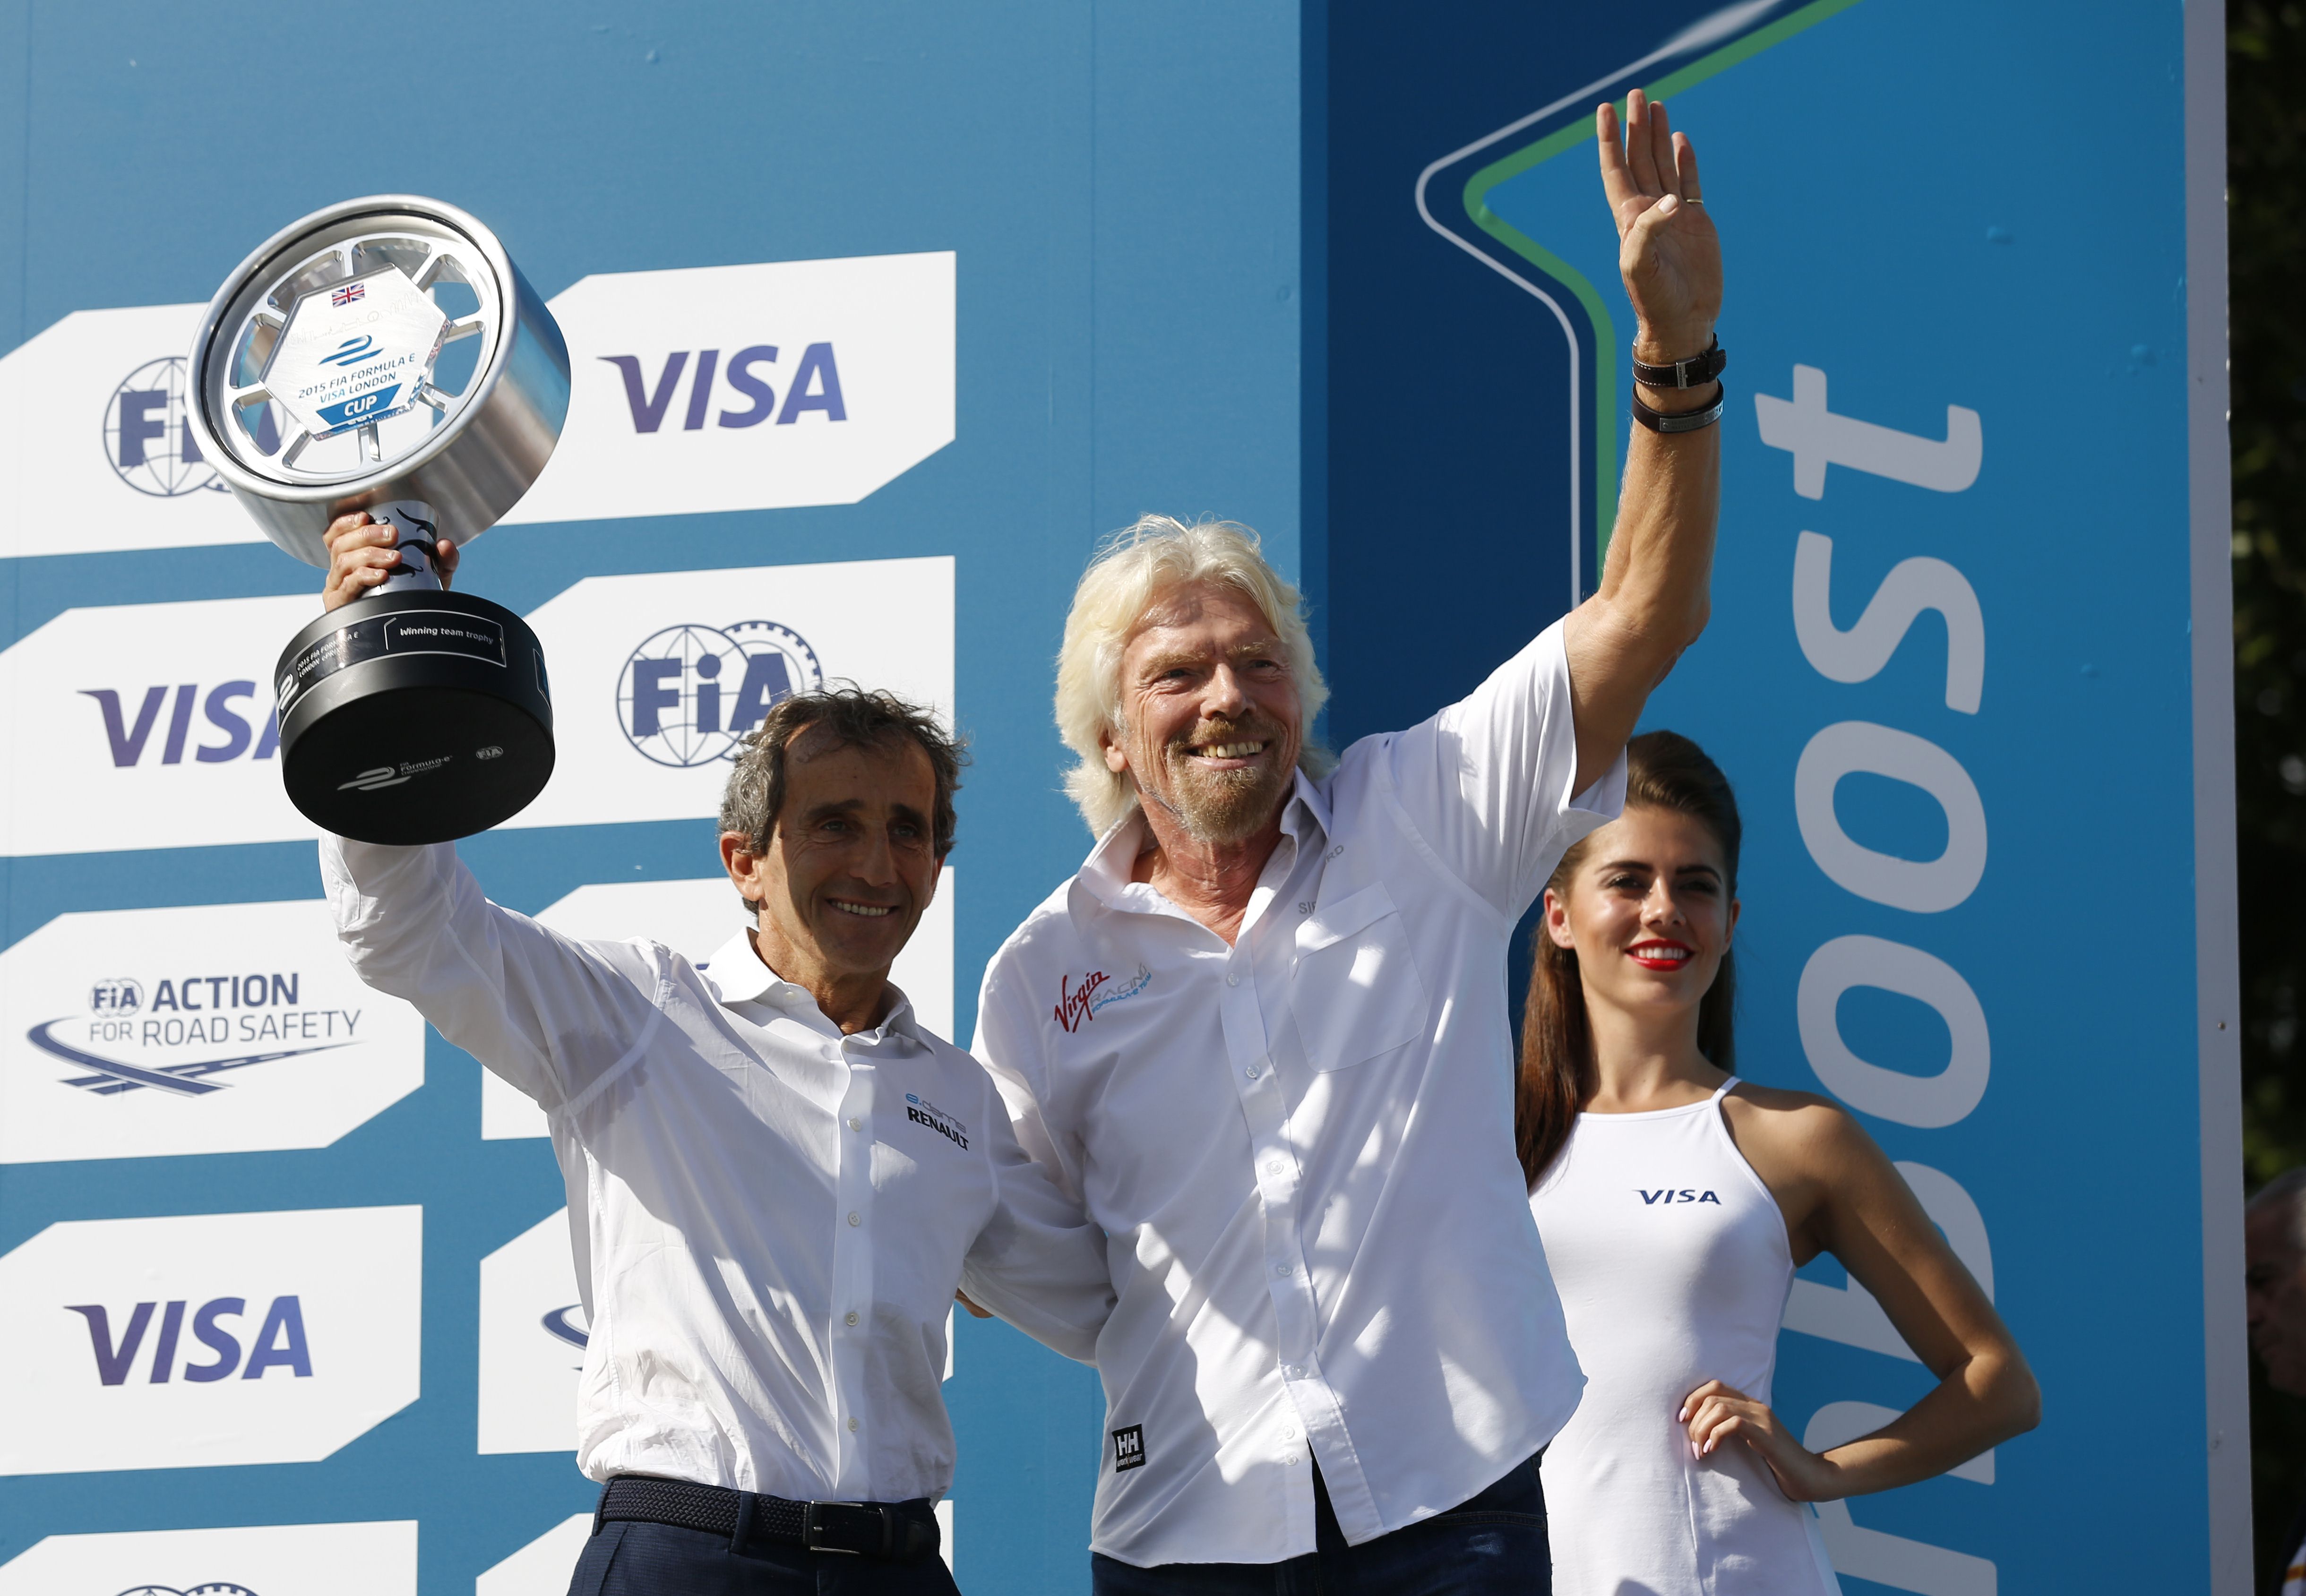 Richard Branson after presenting former French Formula One driver Alain Prost with the team trophy after the finale of the Formula E series in London. Photo: AFP